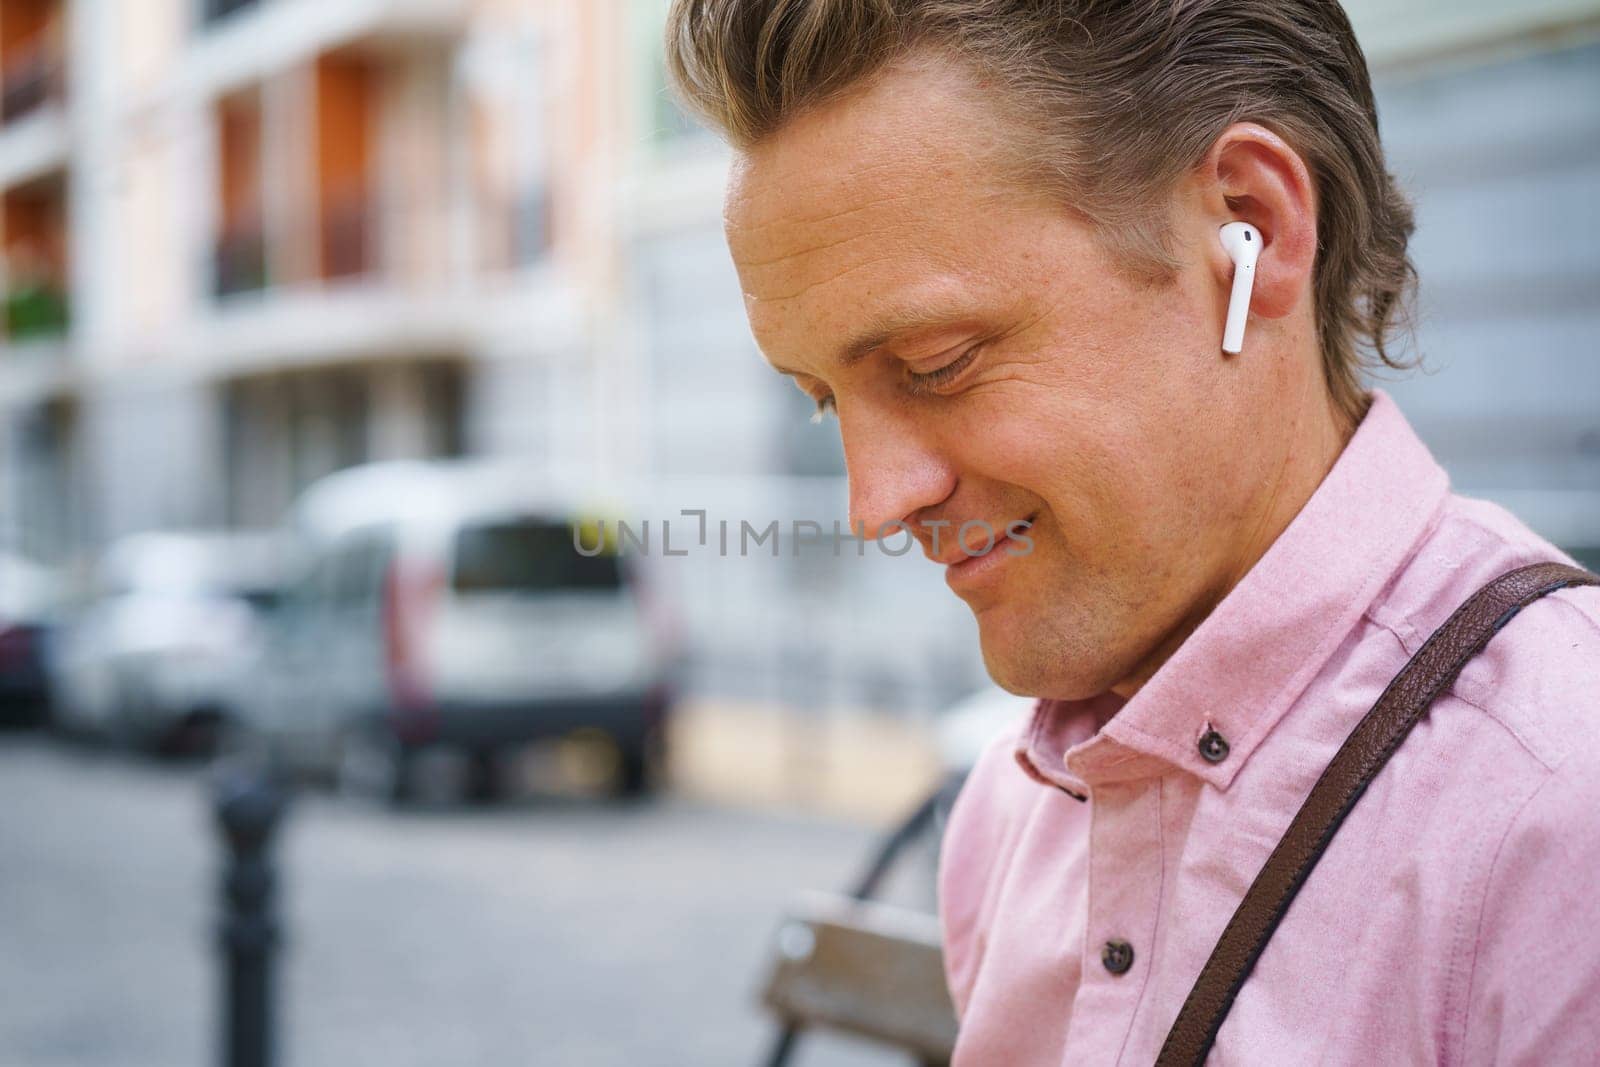 Moment of pure happiness as man with closed eyes enjoys listening to music on bench in bustling urban city. He fully immersed in music, finding relaxation and contentment in melodies. by LipikStockMedia